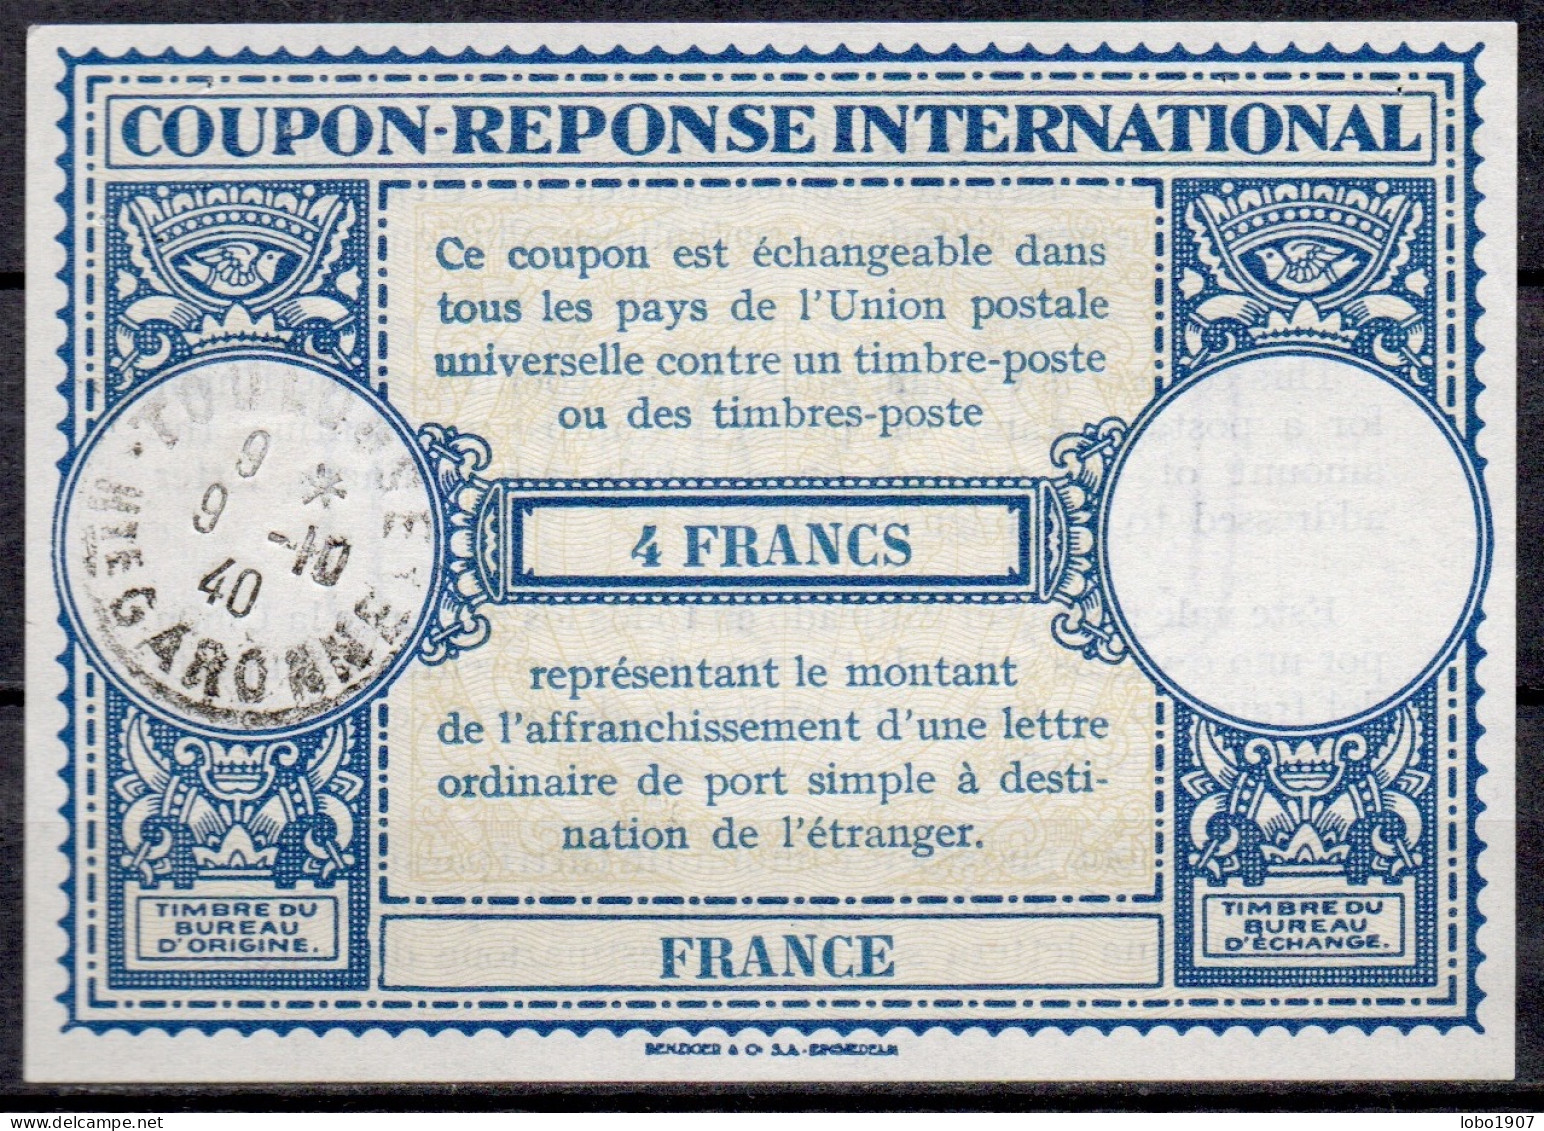 FRANCE  Rare Type Lo13ap  4 FRANCS  International Reply Coupon Reponse Antwortschein IRC IAS Cupon Respuesta O TOULOUSE - Reply Coupons